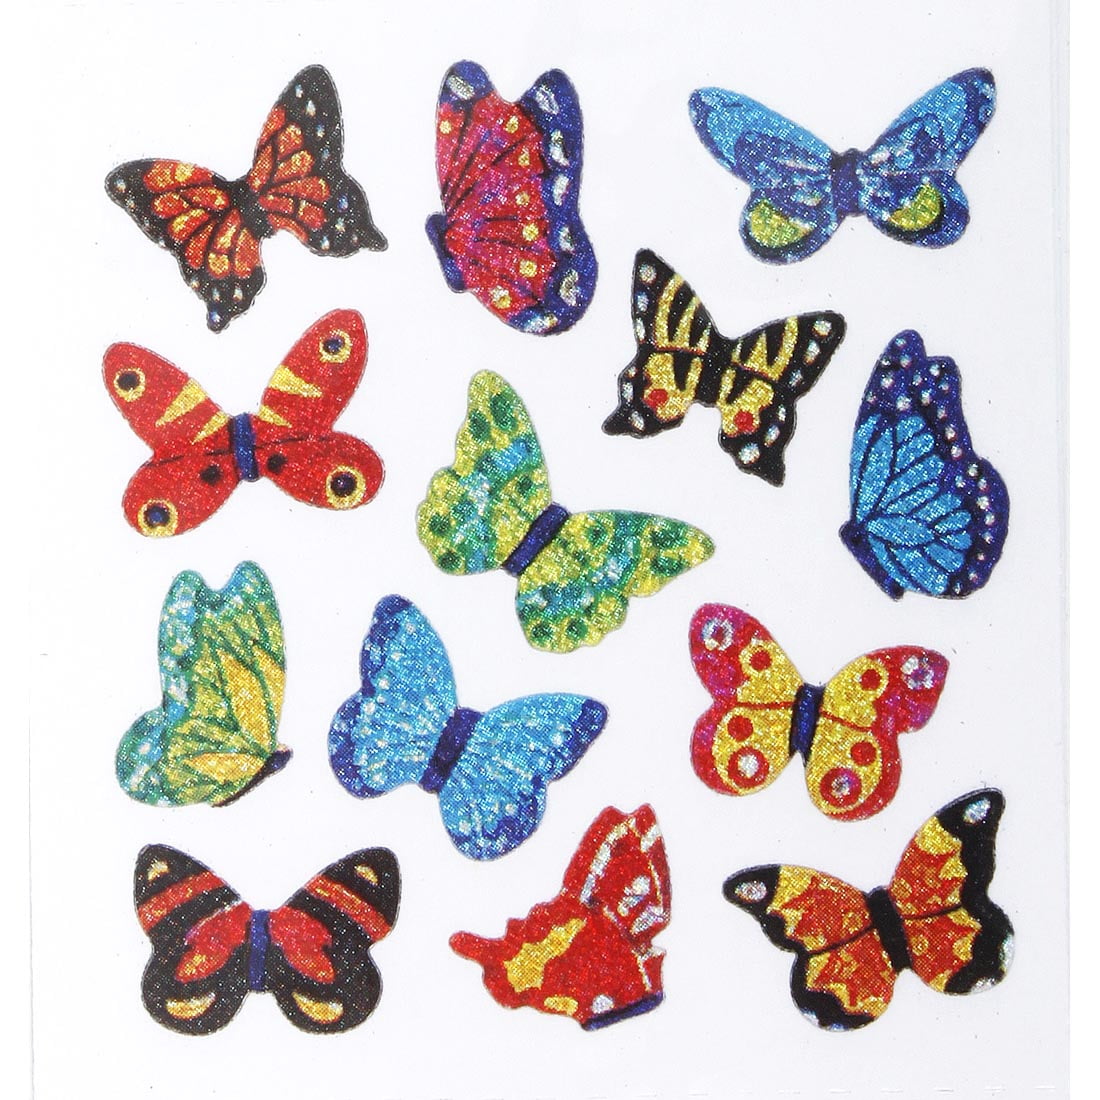 100 Assorted Glittery Dotted Butterfly Motifs 4 Card Crafts Sewing Embroidery 